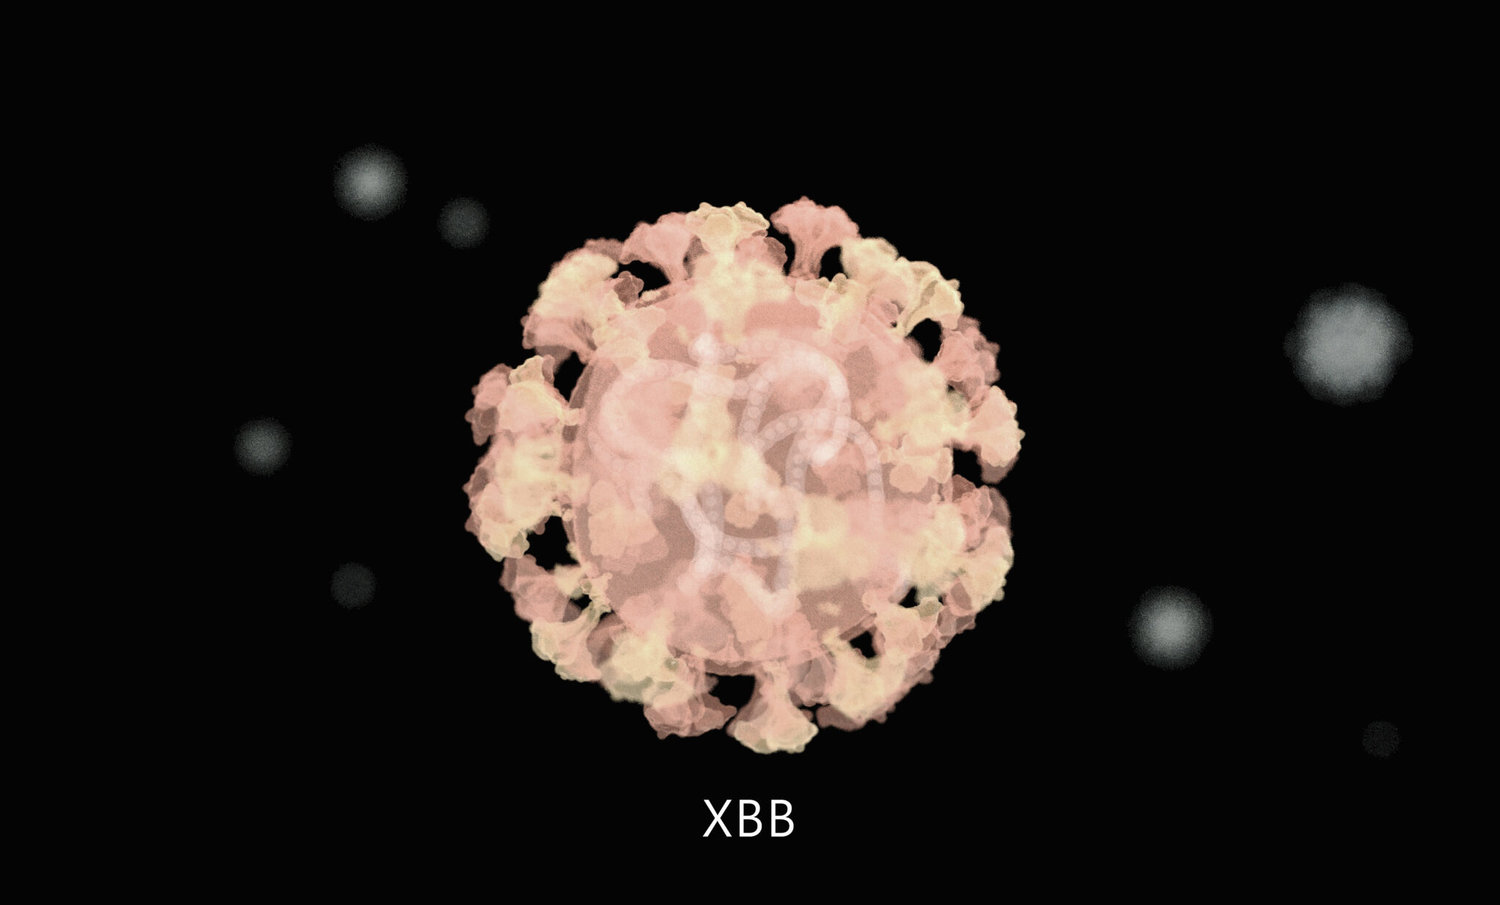 New Coronavirus variants called "XBB" found in Hong Kong and Thailand.